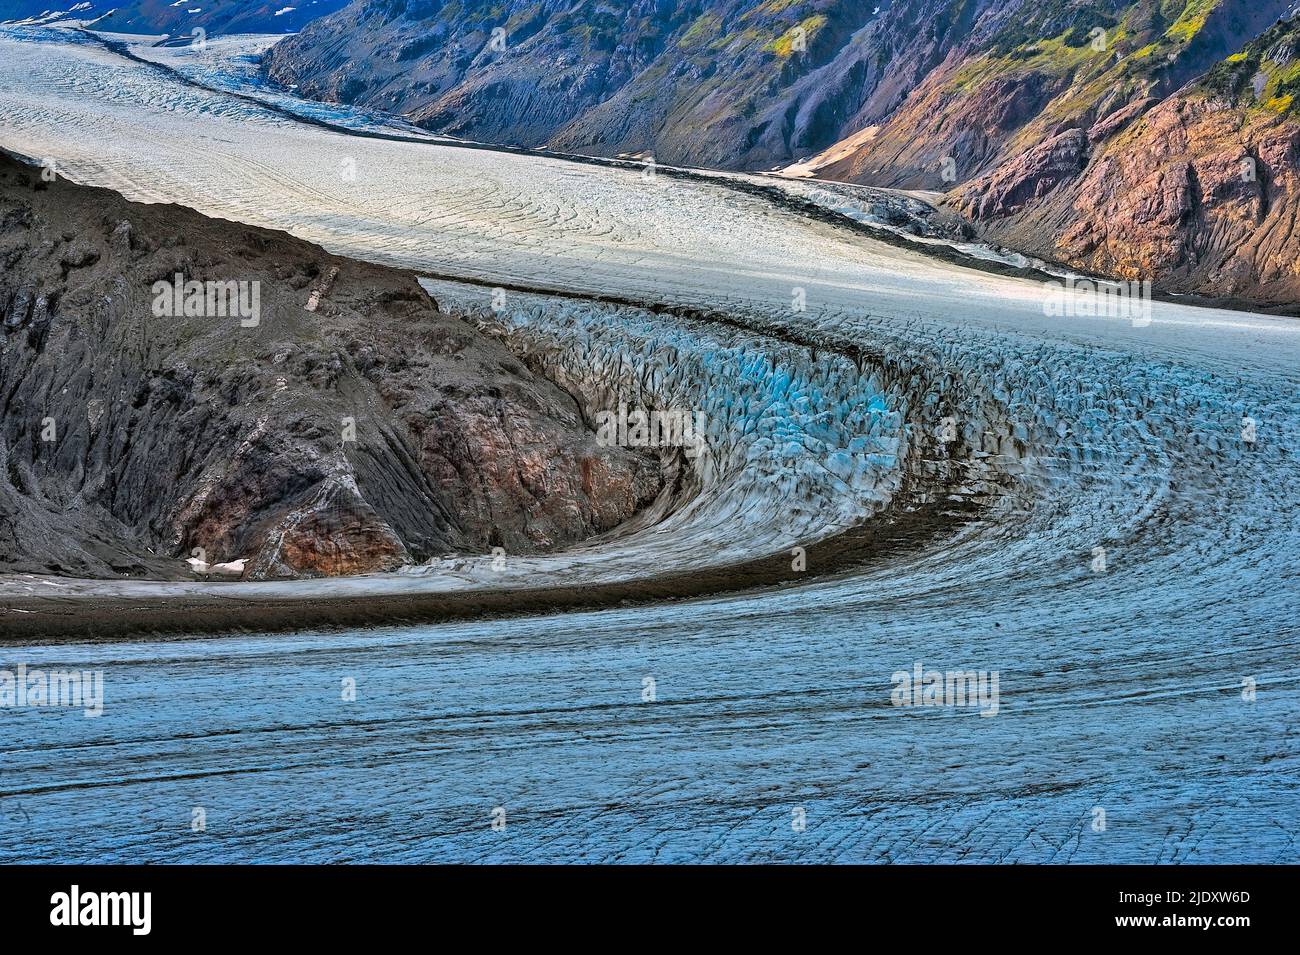 The mighty Salmon Glacier in northern British Columbia snakes around a corner high on a mountain side. Stock Photo